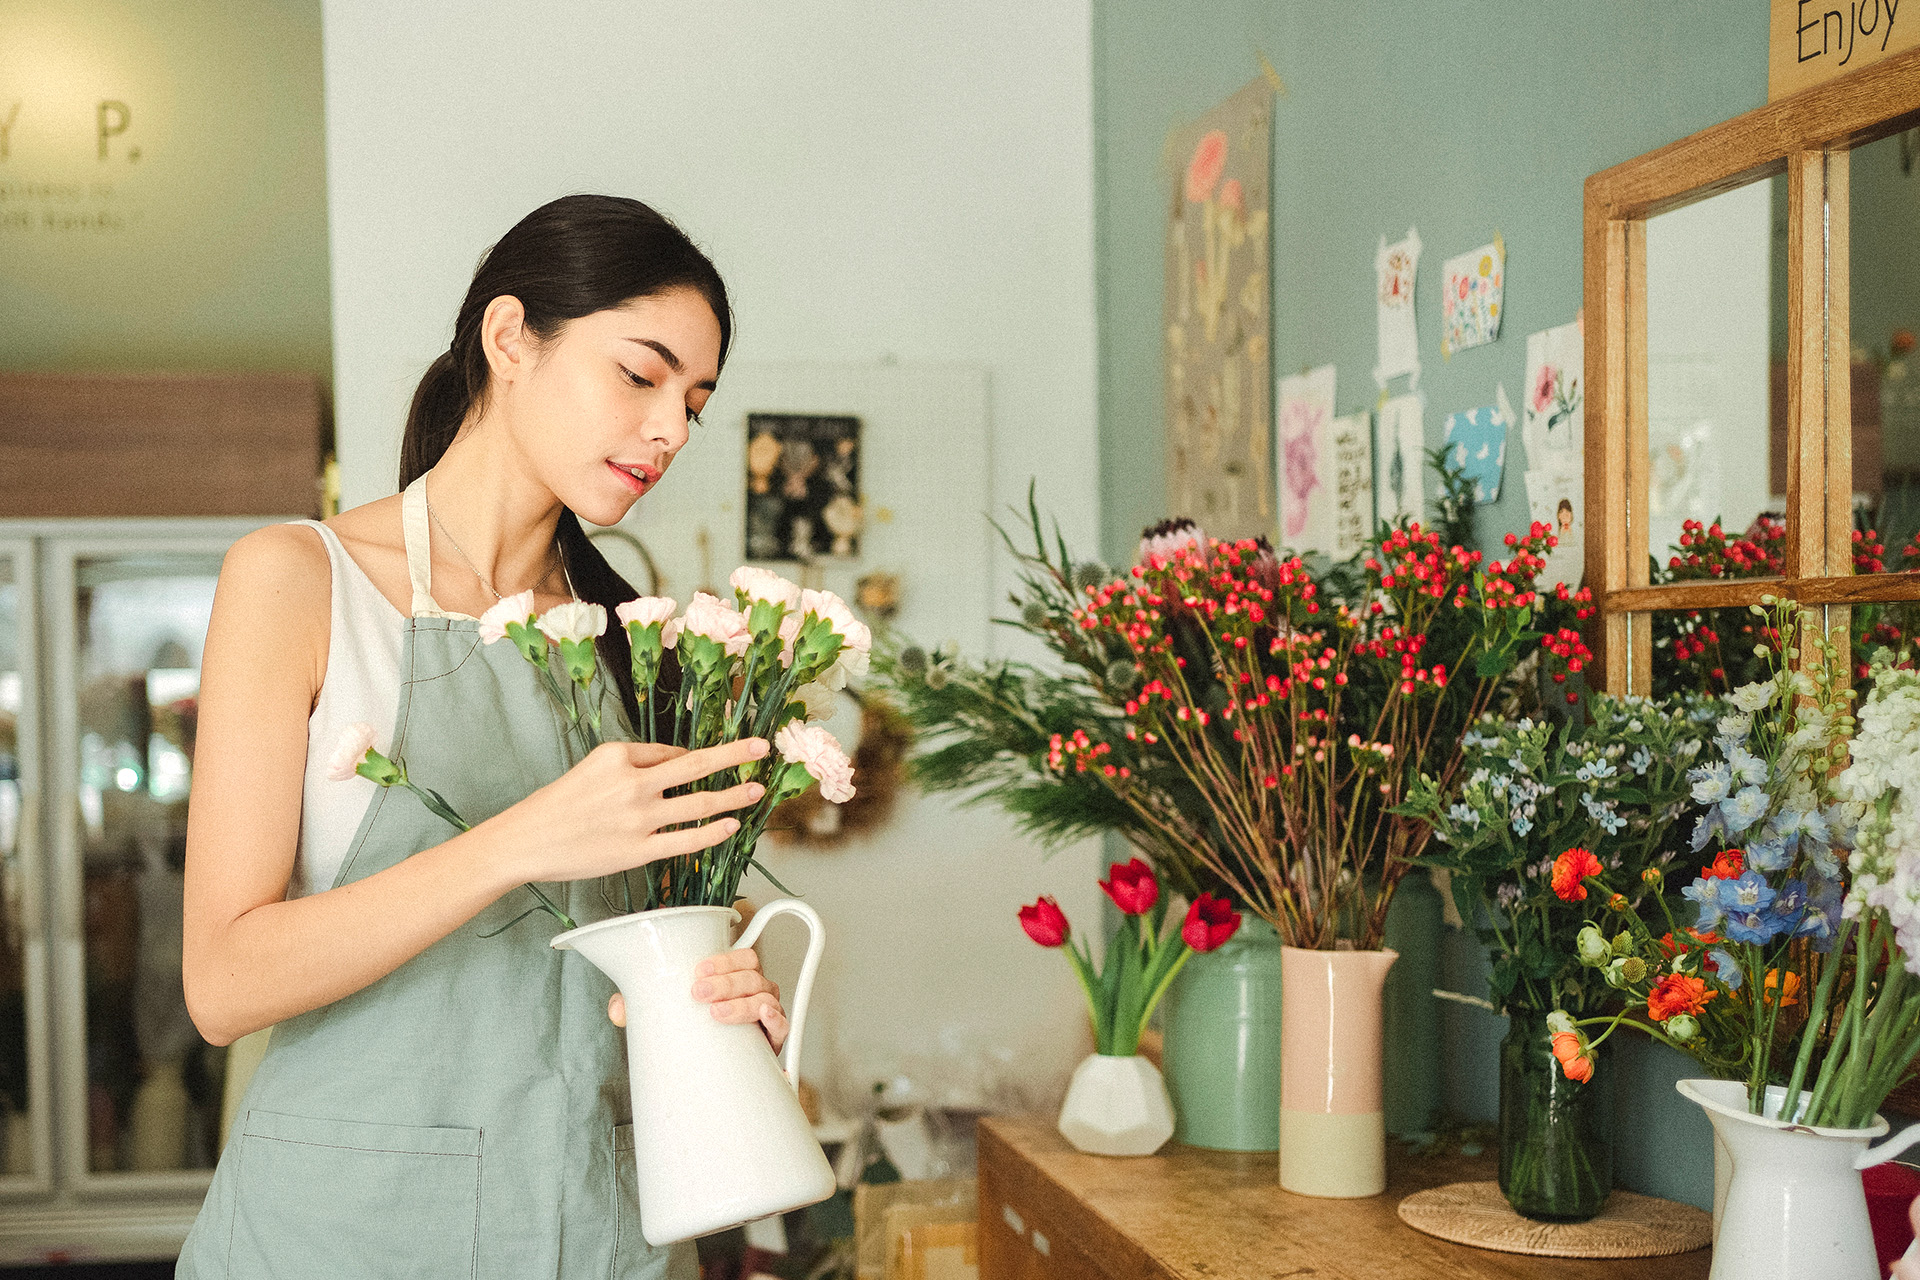 image of a dark haired woman working in  a flower shop